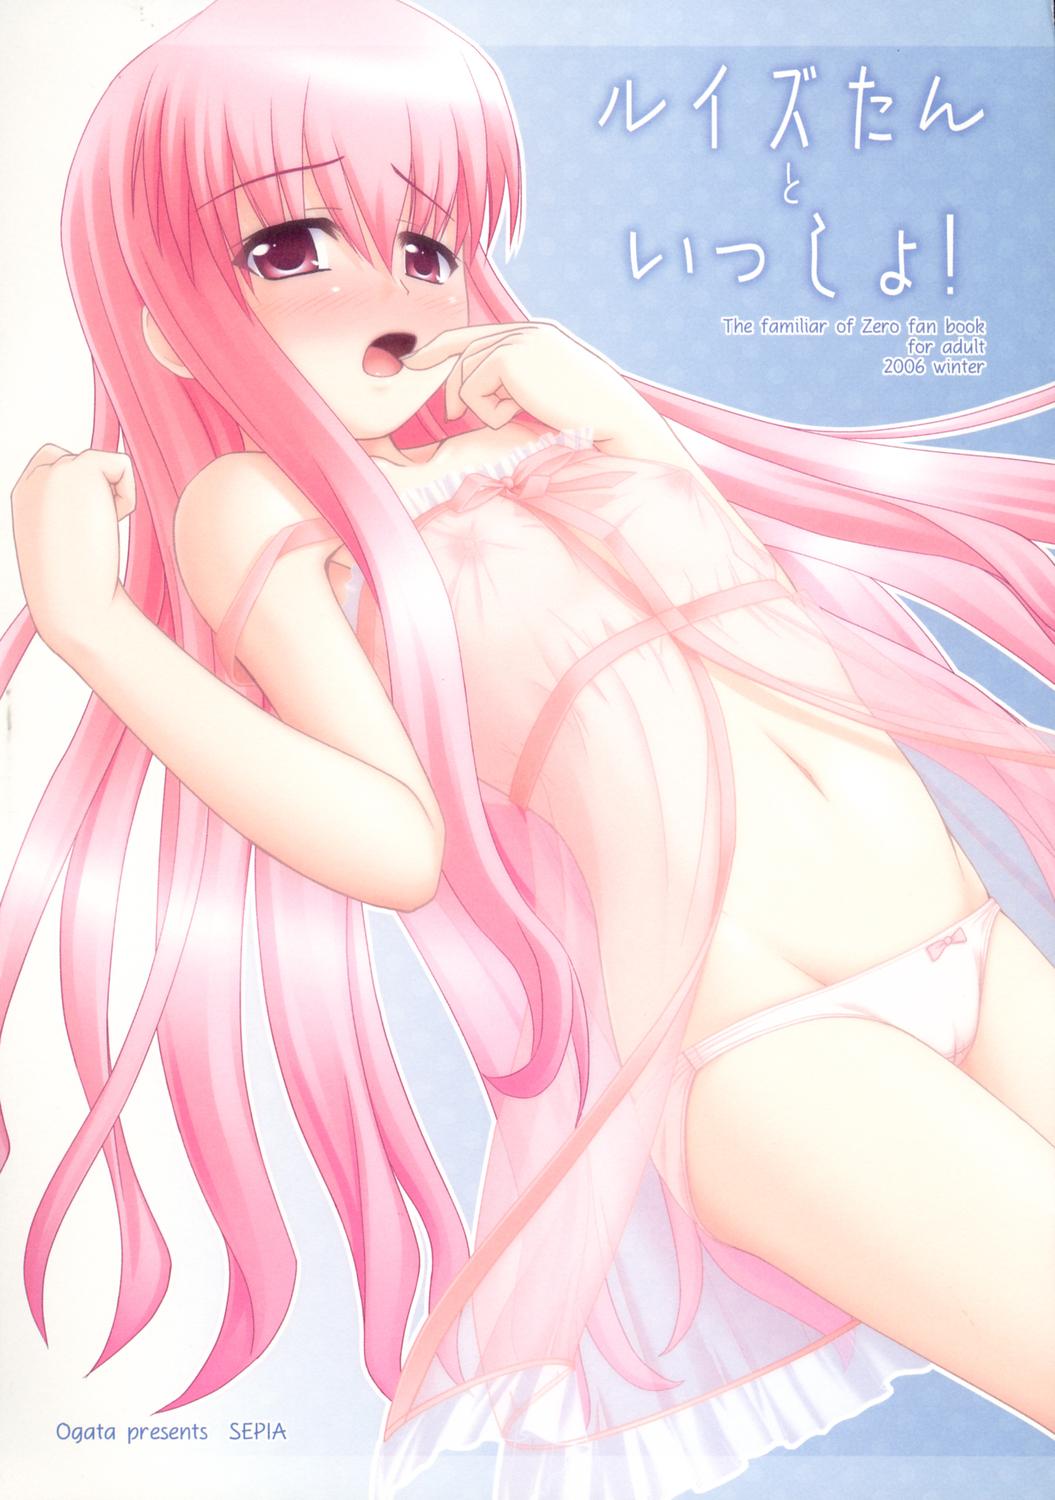 Louise-tan to Issho! 8